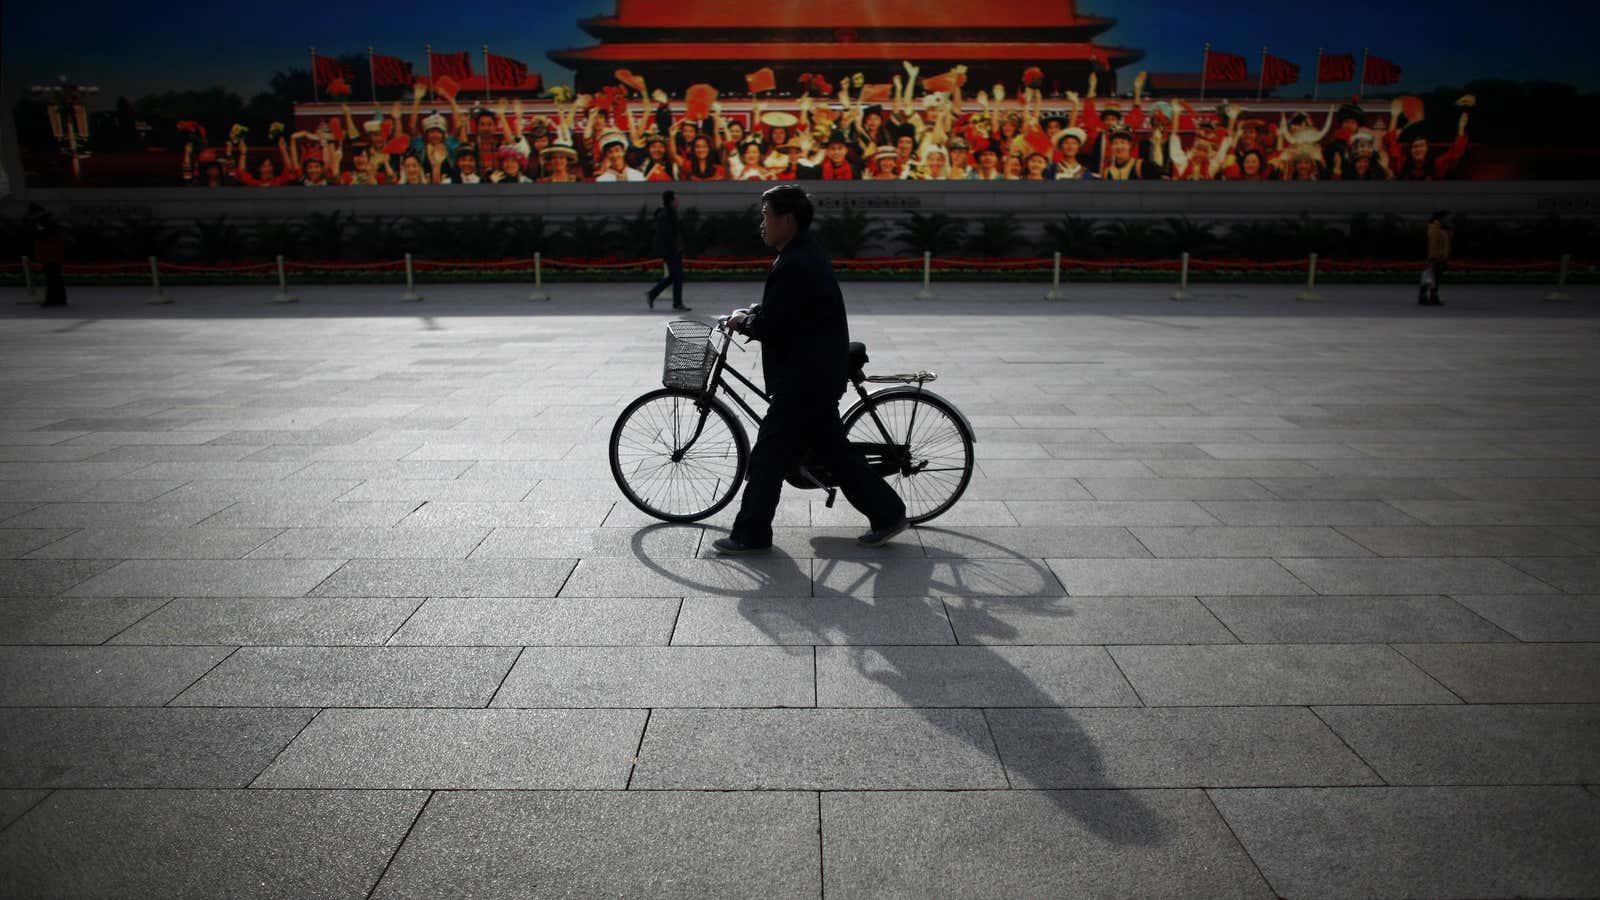 A man walks in front of a video promoting the Chinese Communist party in Beijing’s Tiananmen Square.